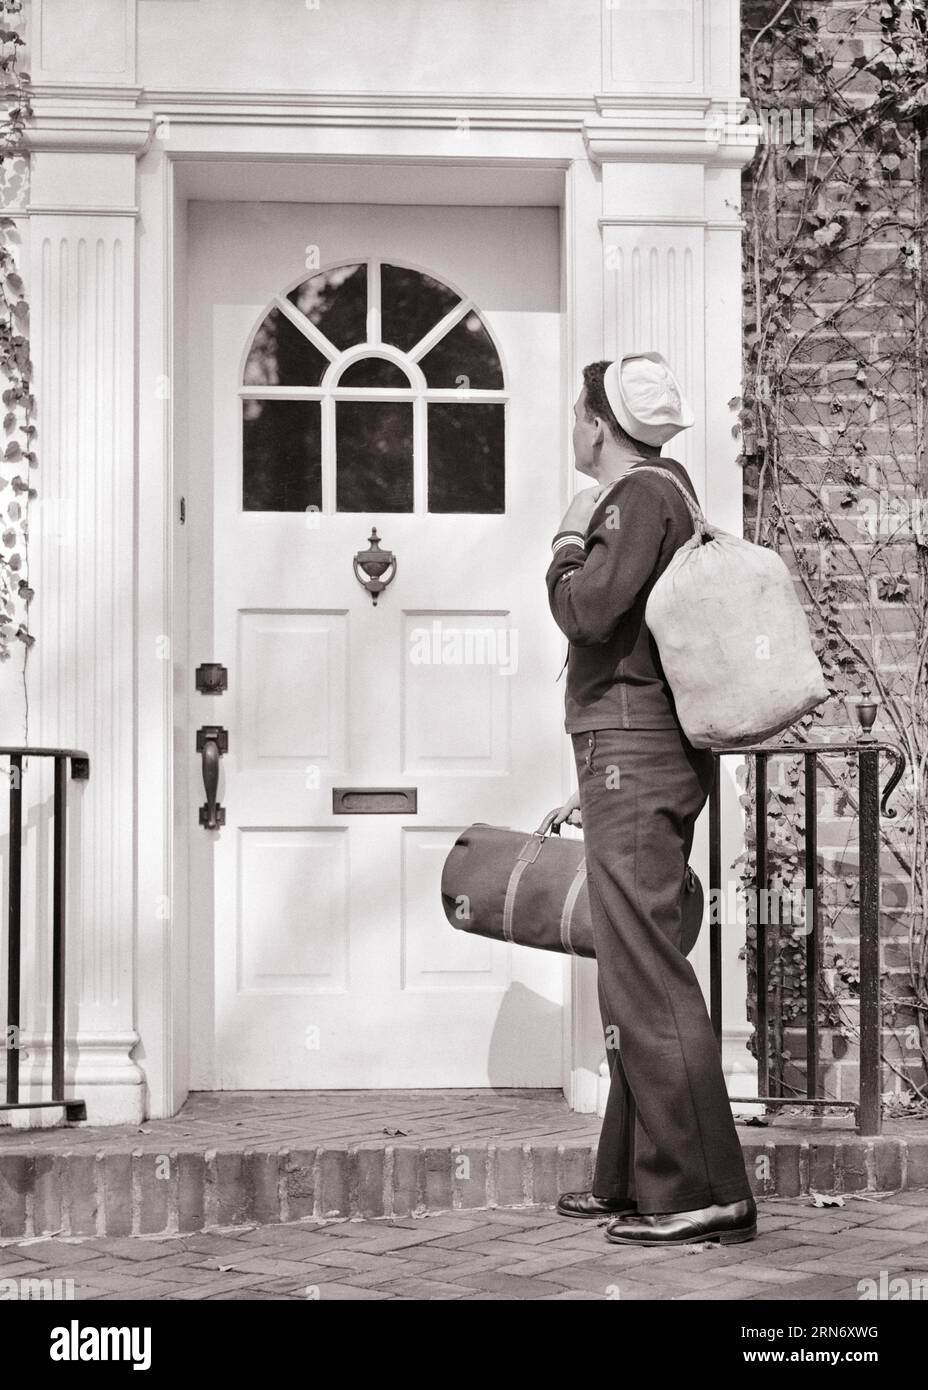 1940s BACK VIEW OF NAVY SAILOR IN UNIFORM HOLDING DUFFLE BAGS STANDING IN FRONT OF THE FRONT DOOR OF HOUSE COMING HOME - m2772 HAR001 HARS WW2 NAVY HOME LIFE UNITED STATES COPY SPACE FULL-LENGTH PERSONS UNITED STATES OF AMERICA MALES FORCE LEAVE B&W NORTH AMERICA COMING FREEDOM NORTH AMERICAN GLOBAL NAVAL EXCITEMENT EXTERIOR POWERFUL WORLD WARS PRIDE WORLD WAR WORLD WAR TWO REAR VIEW WORLD WAR II POLITICS UNIFORMS CONNECTION FORCES CONCEPTUAL FROM BEHIND NAVIES VETERAN WORLD WAR 2 IN FRONT OF VET USN BACK VIEW MID-ADULT MID-ADULT MAN RETURN RETURNING BLACK AND WHITE CAUCASIAN ETHNICITY HAR001 Stock Photo